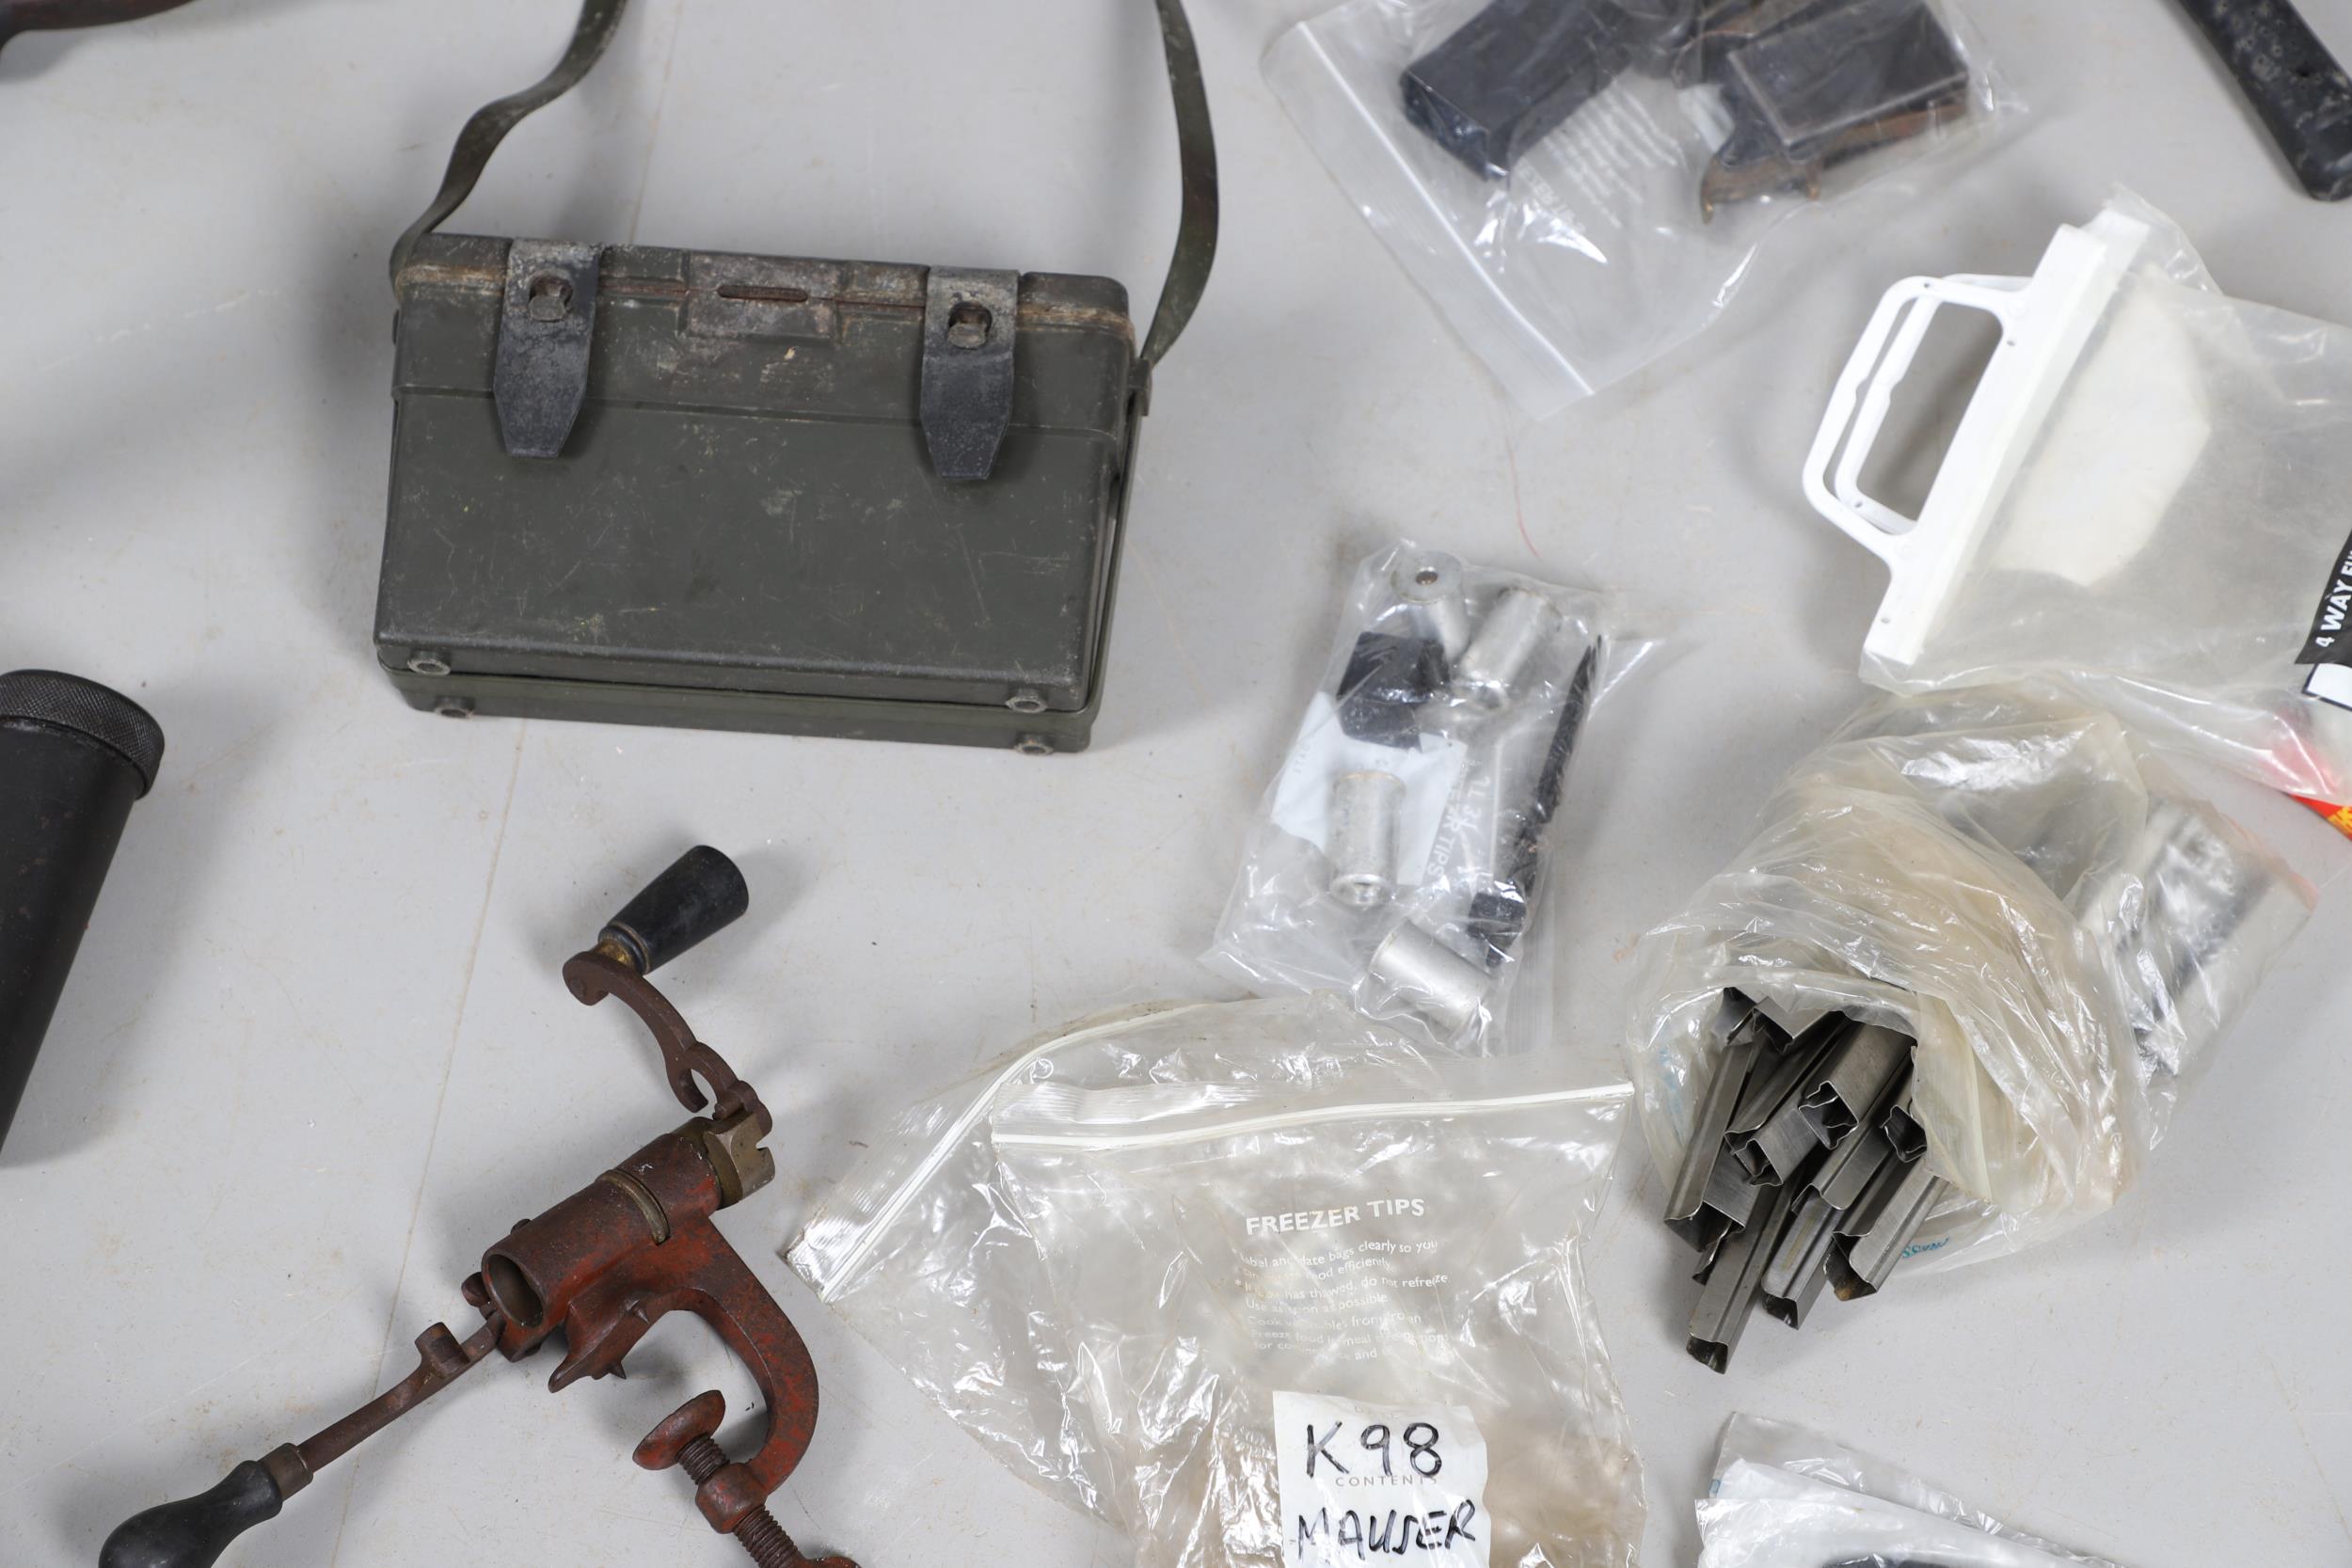 TWO MACHINE GUN BELT LOADING TOOLS AND A COLLECTION OF OTHER ITEMS. - Image 14 of 19